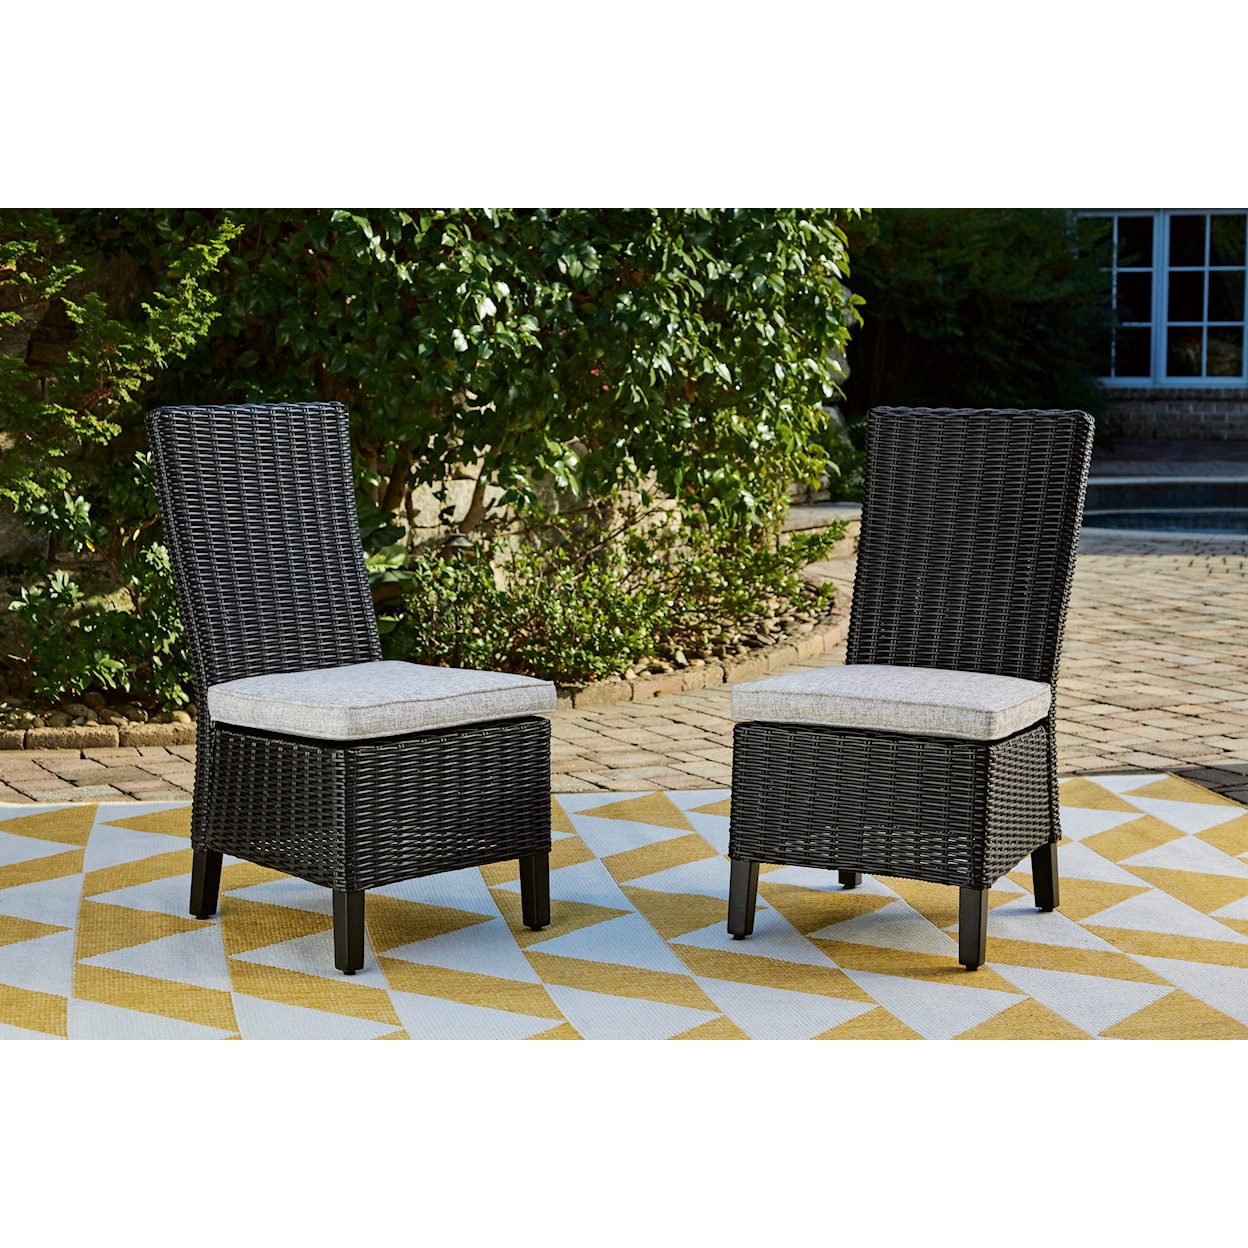 Signature Beachcroft Set of 2 Side Chairs with Cushion